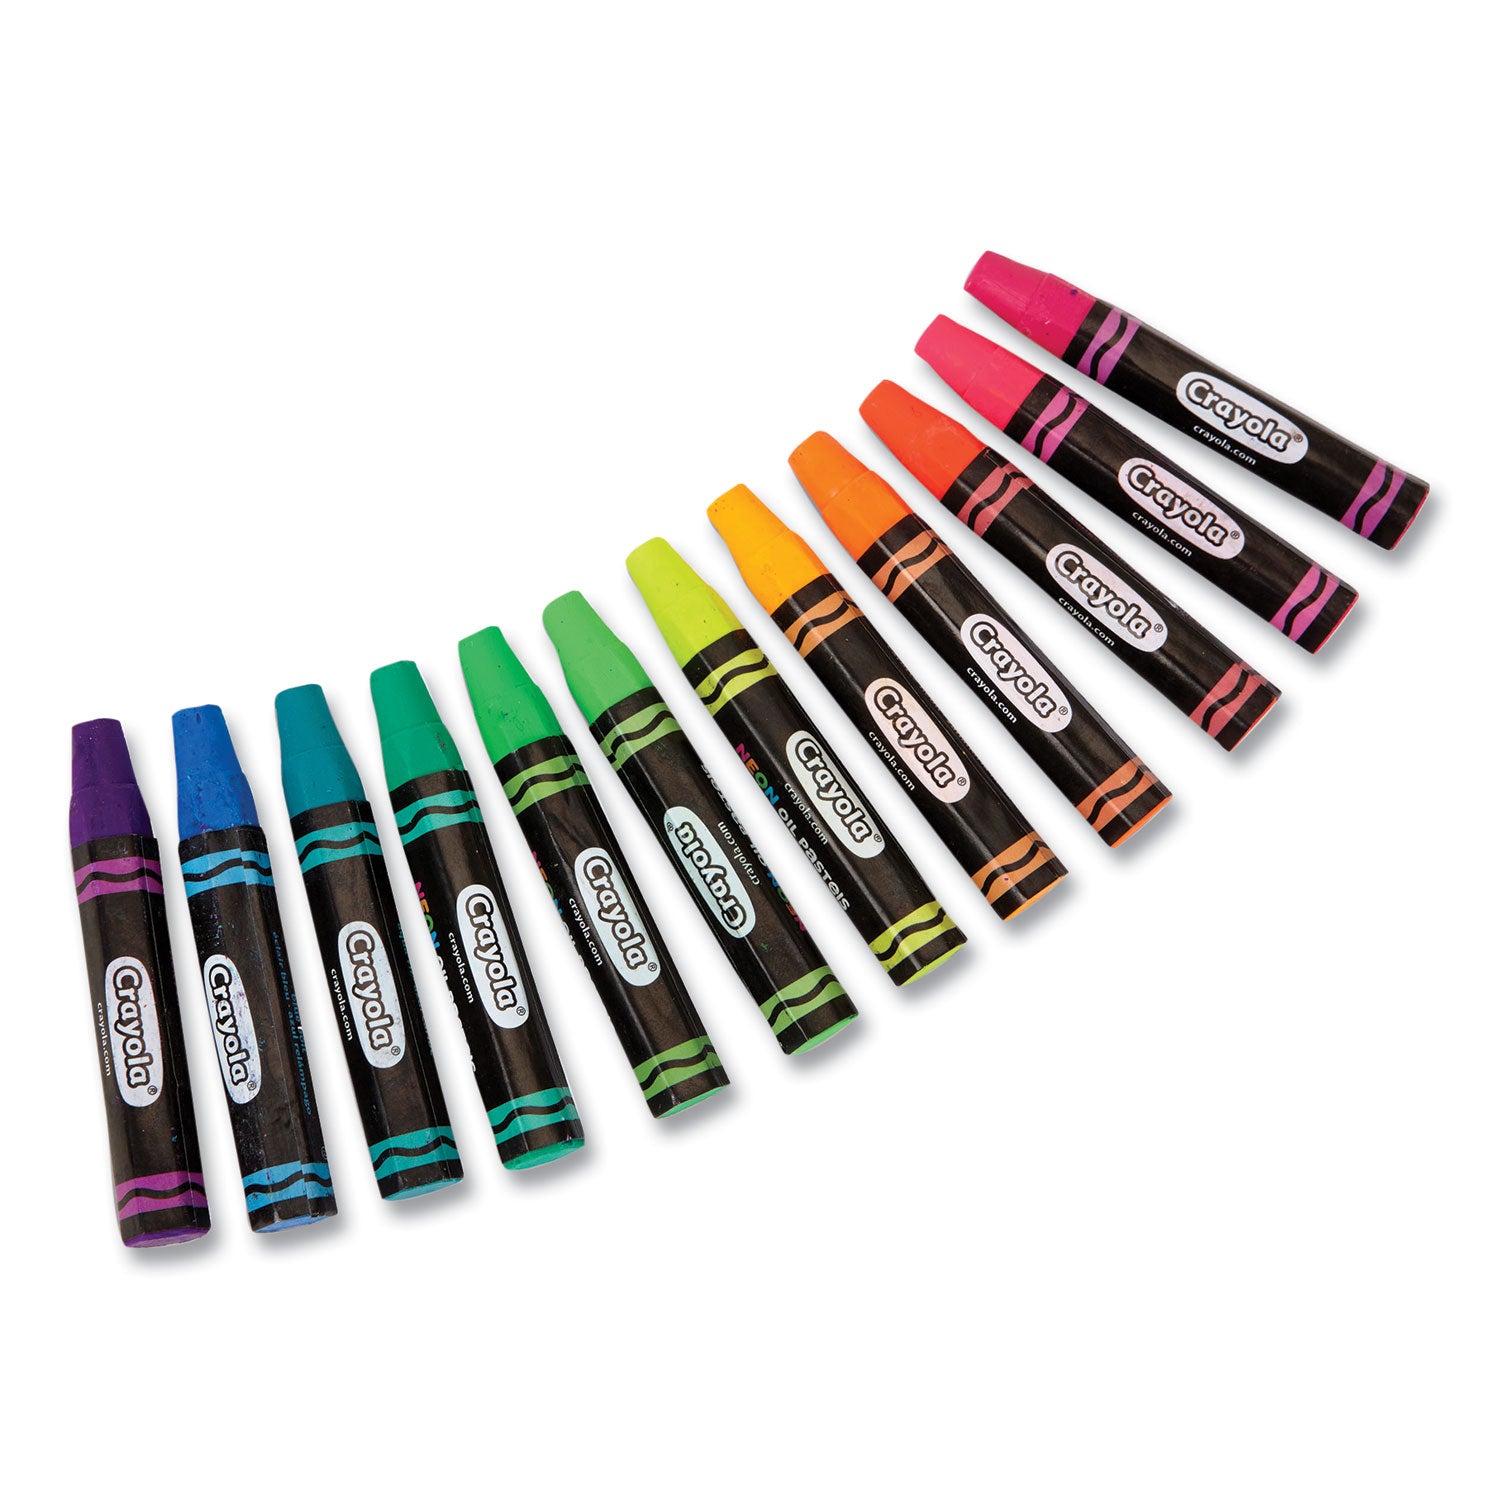 neon-oil-pastels-12-assorted-colors-12-pack_cyo524613 - 2